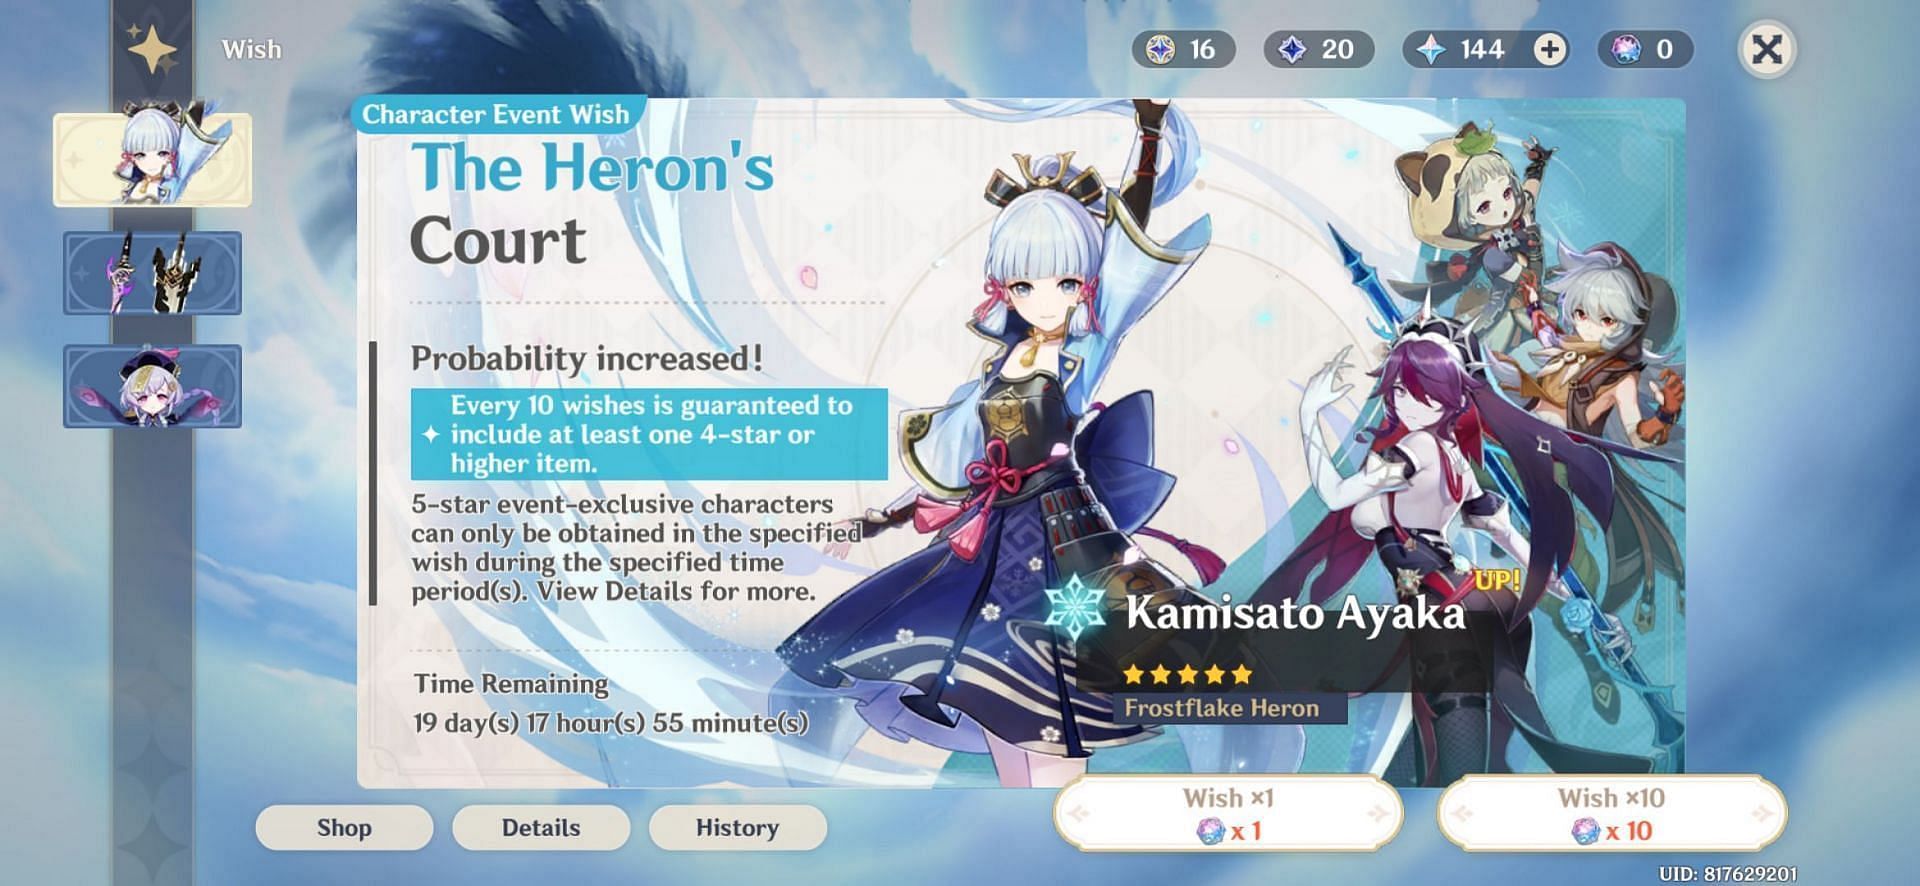 Check pity in wish history located in Event Wish page (Image via HoYoverse)